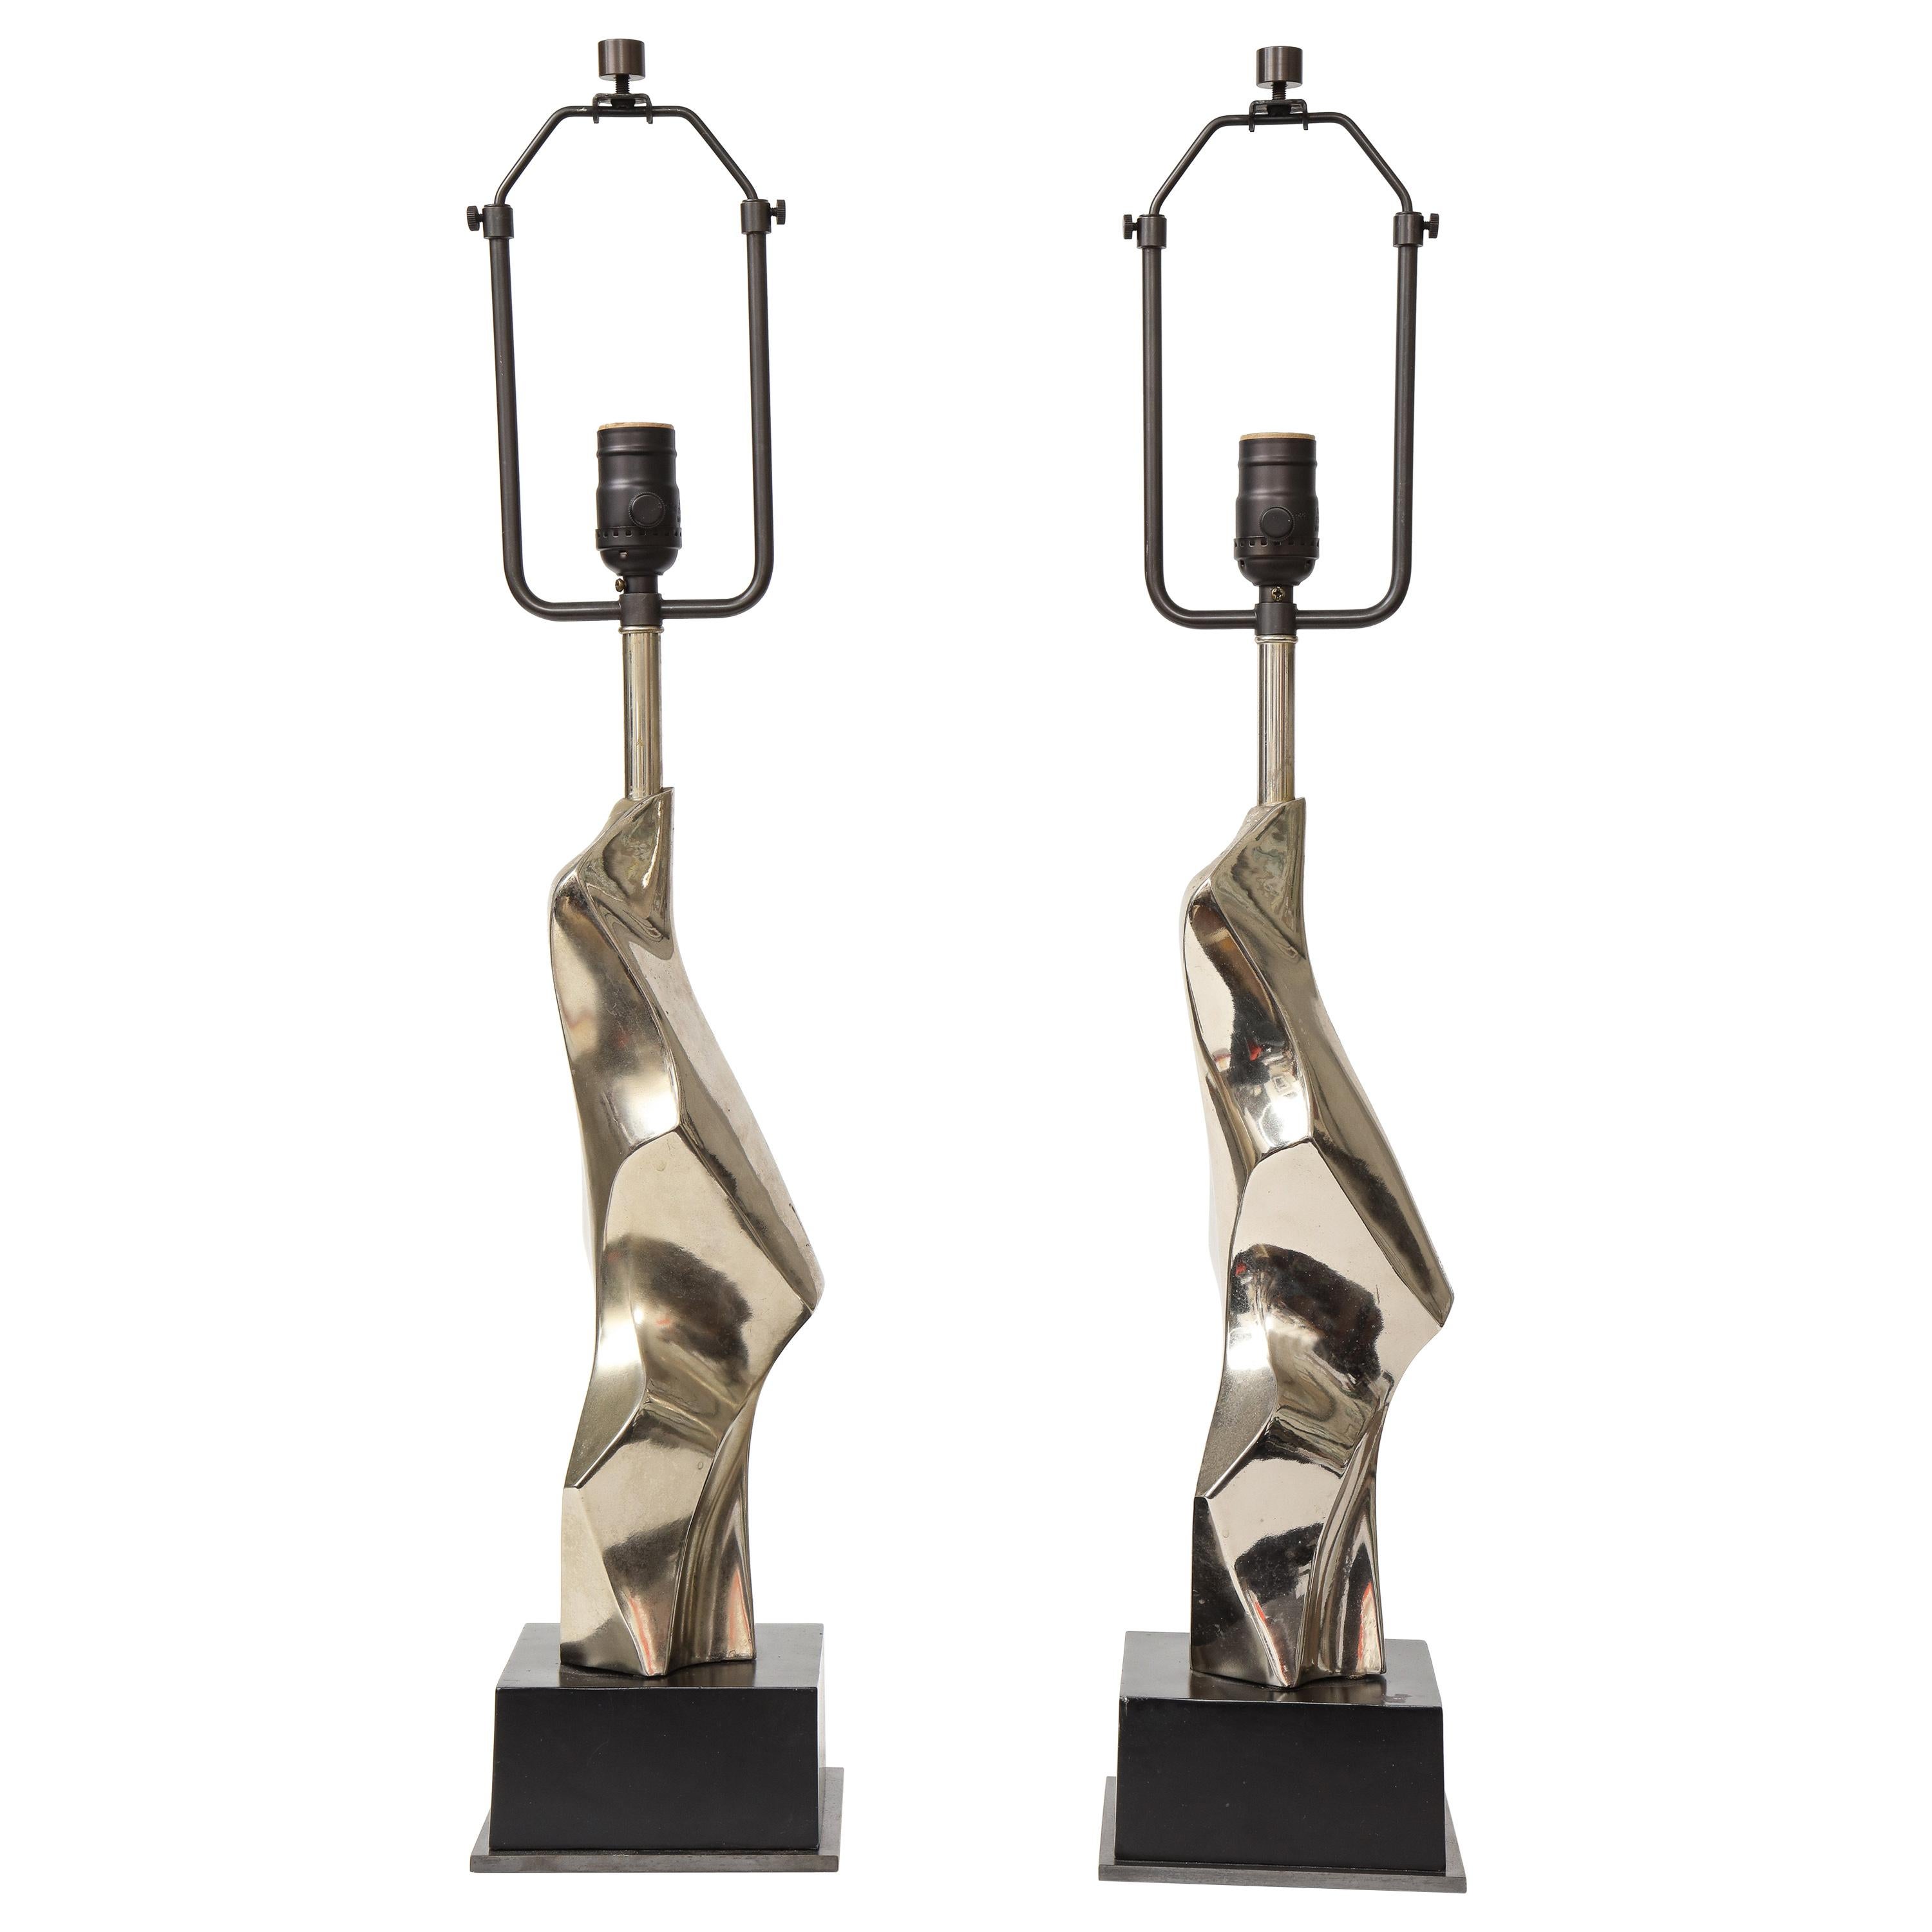 Pair of Brutalist Chrome Table Lamps by Richard Barr for Laurel, c. 1960s